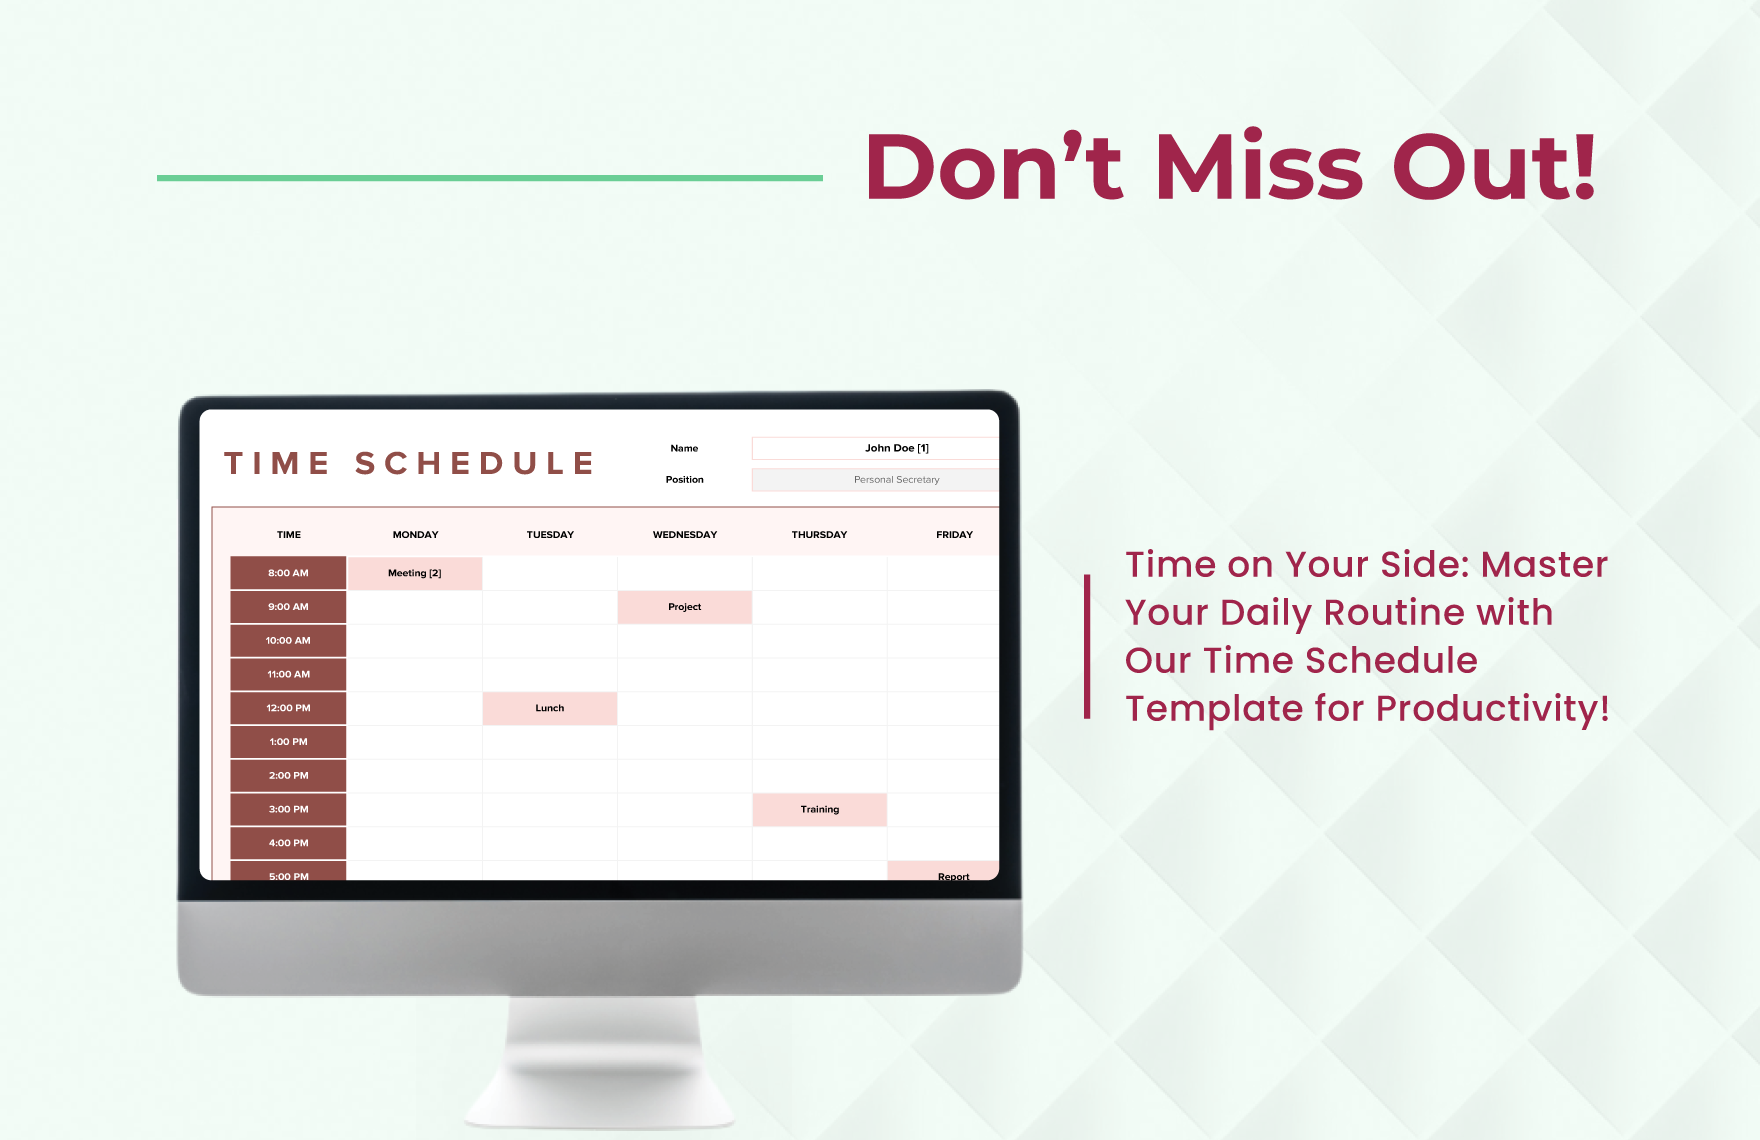 Time Schedule Template